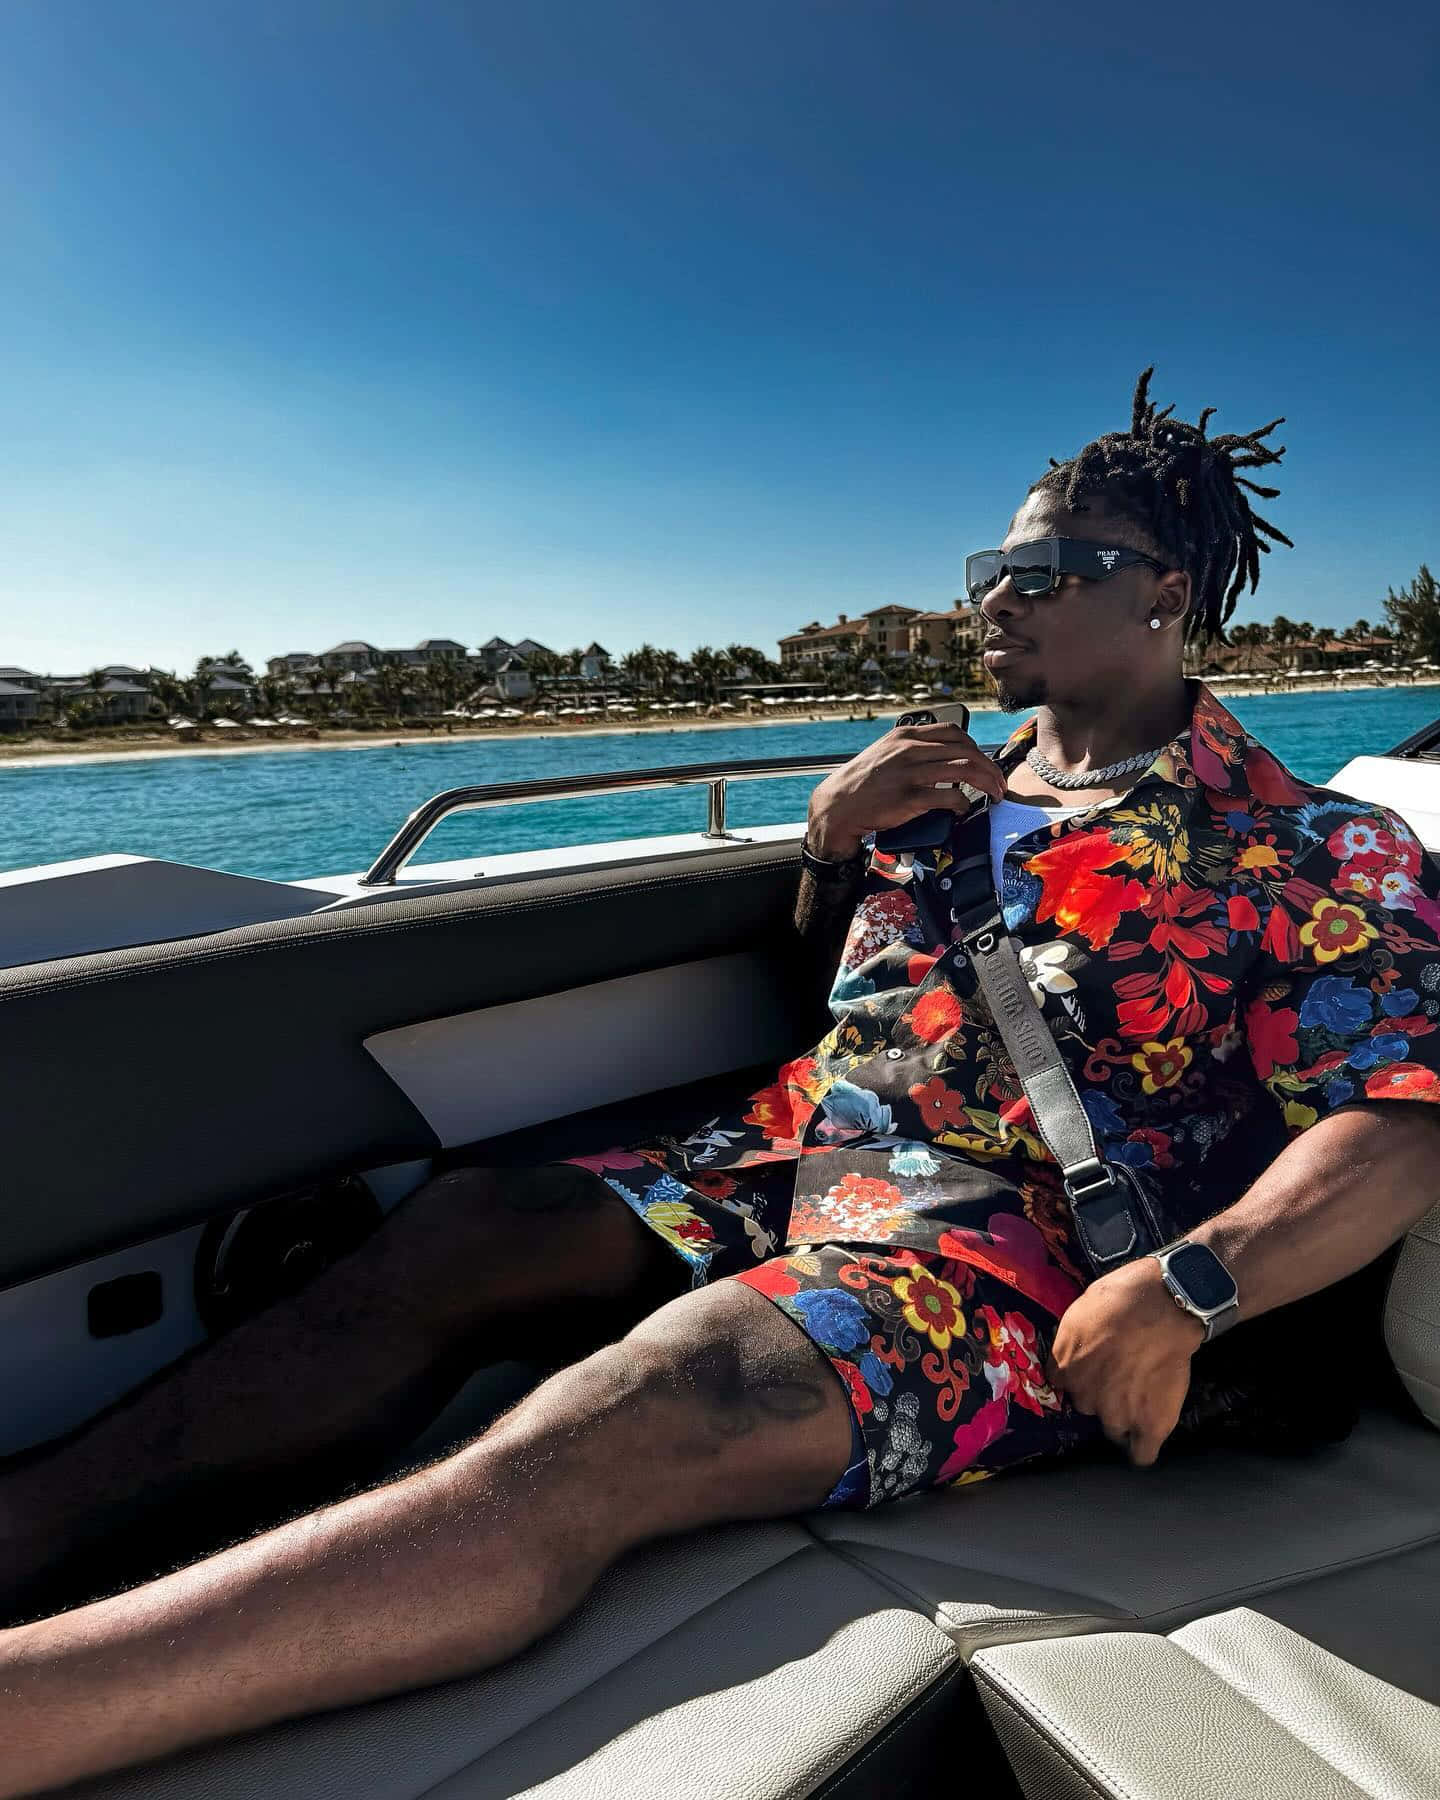 Man Relaxingon Boatin Floral Outfit Wallpaper